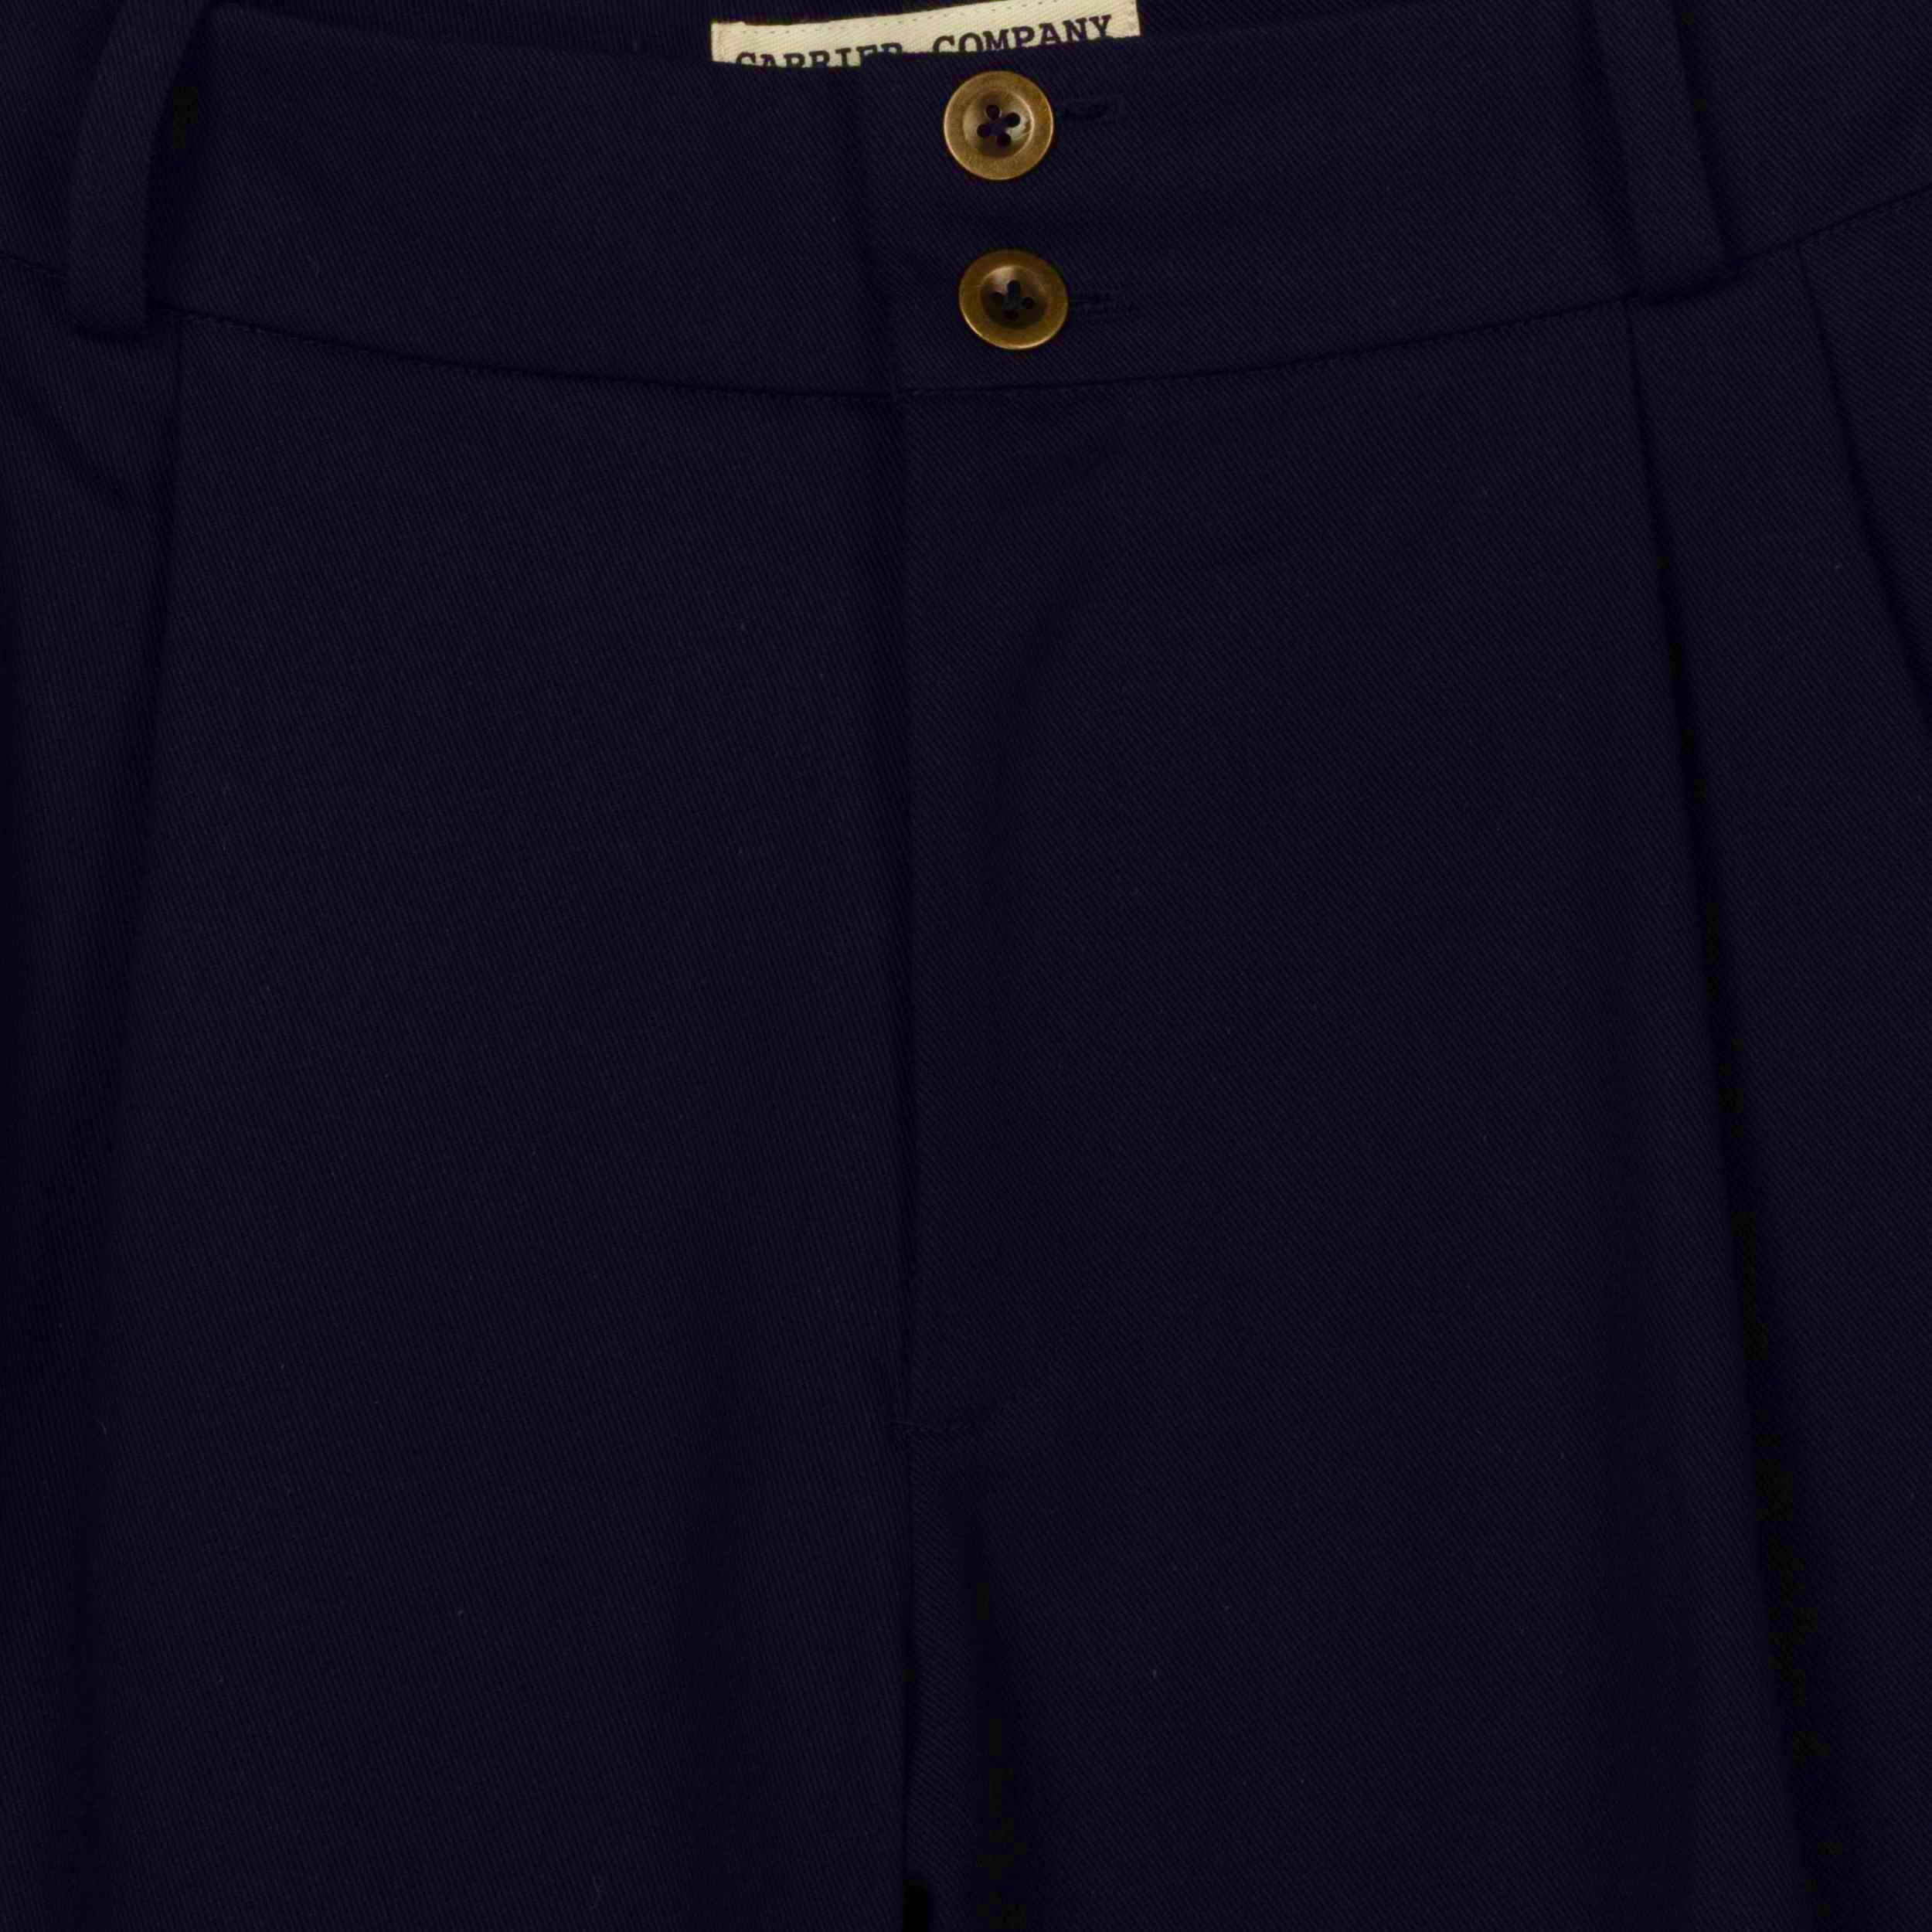 Carrier Company Dutch shorts in Navy Cotton Drill